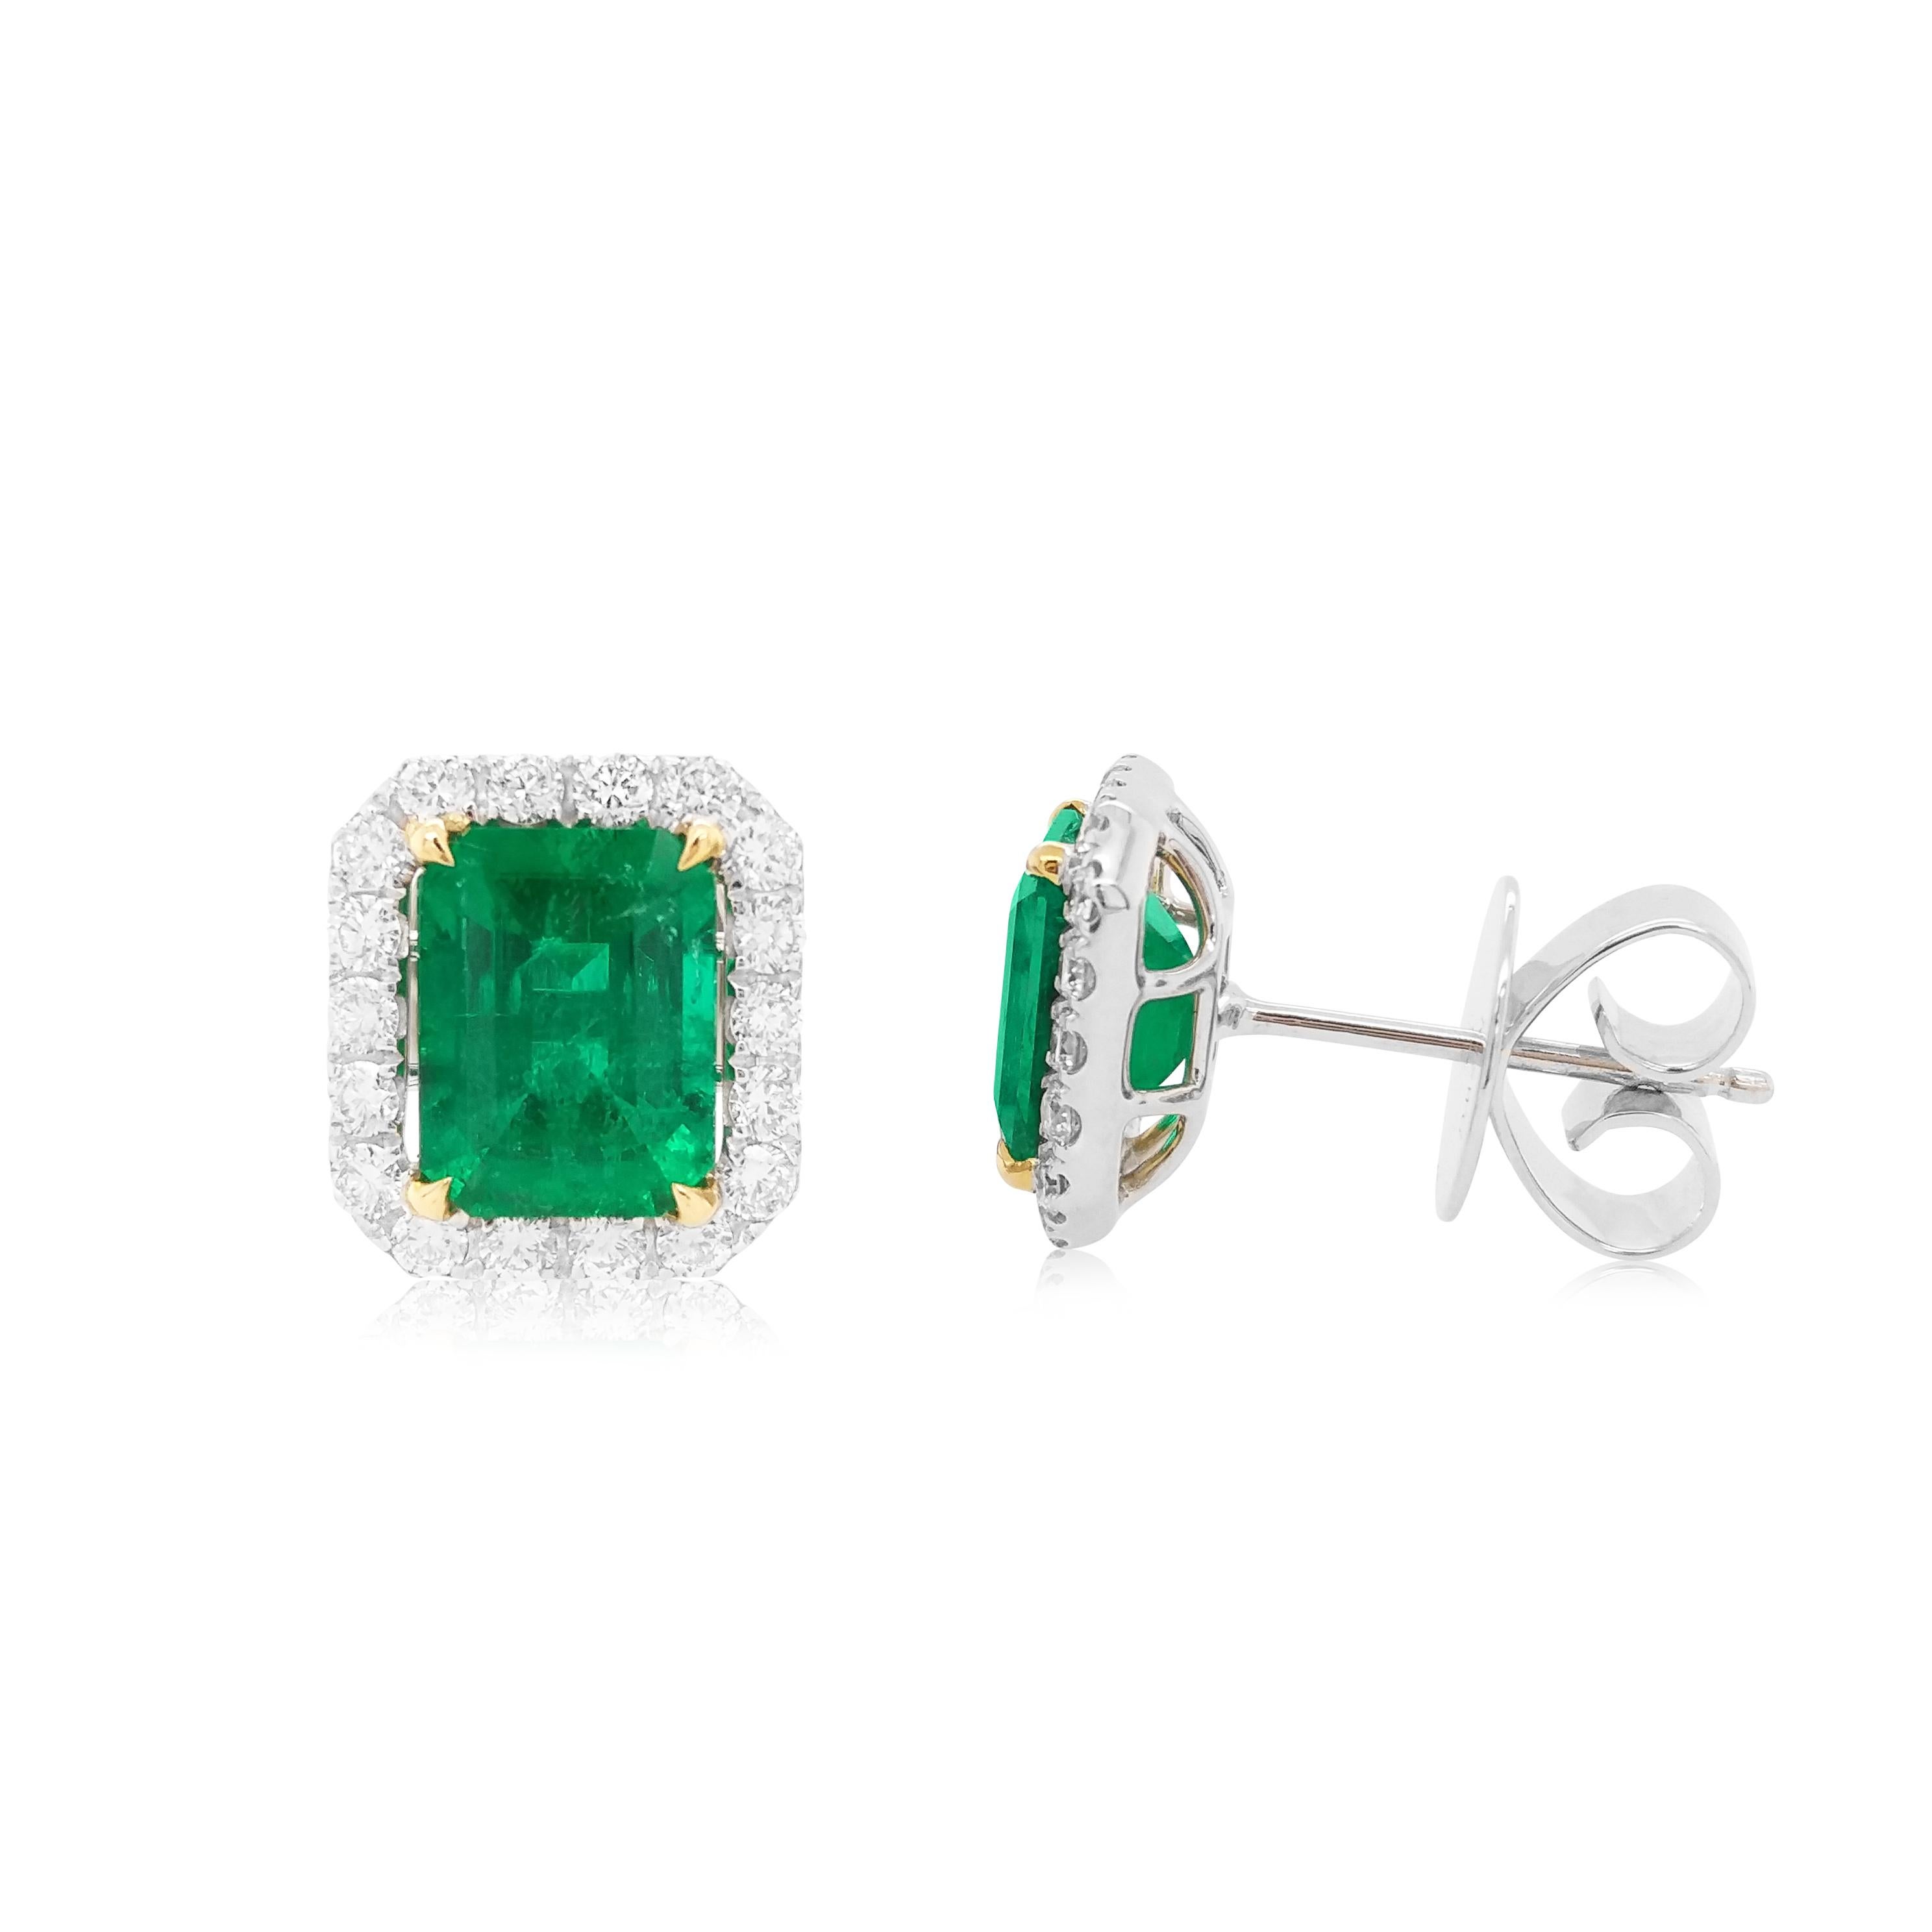 These elegant earrings feature lustrous emerald-cut Colombian Emeralds at the heart of the design, surrounded by a halo of scintillating white diamonds. Bold and striking, set in 18 Karat white and yellow gold to enrich the spectacular hues of the